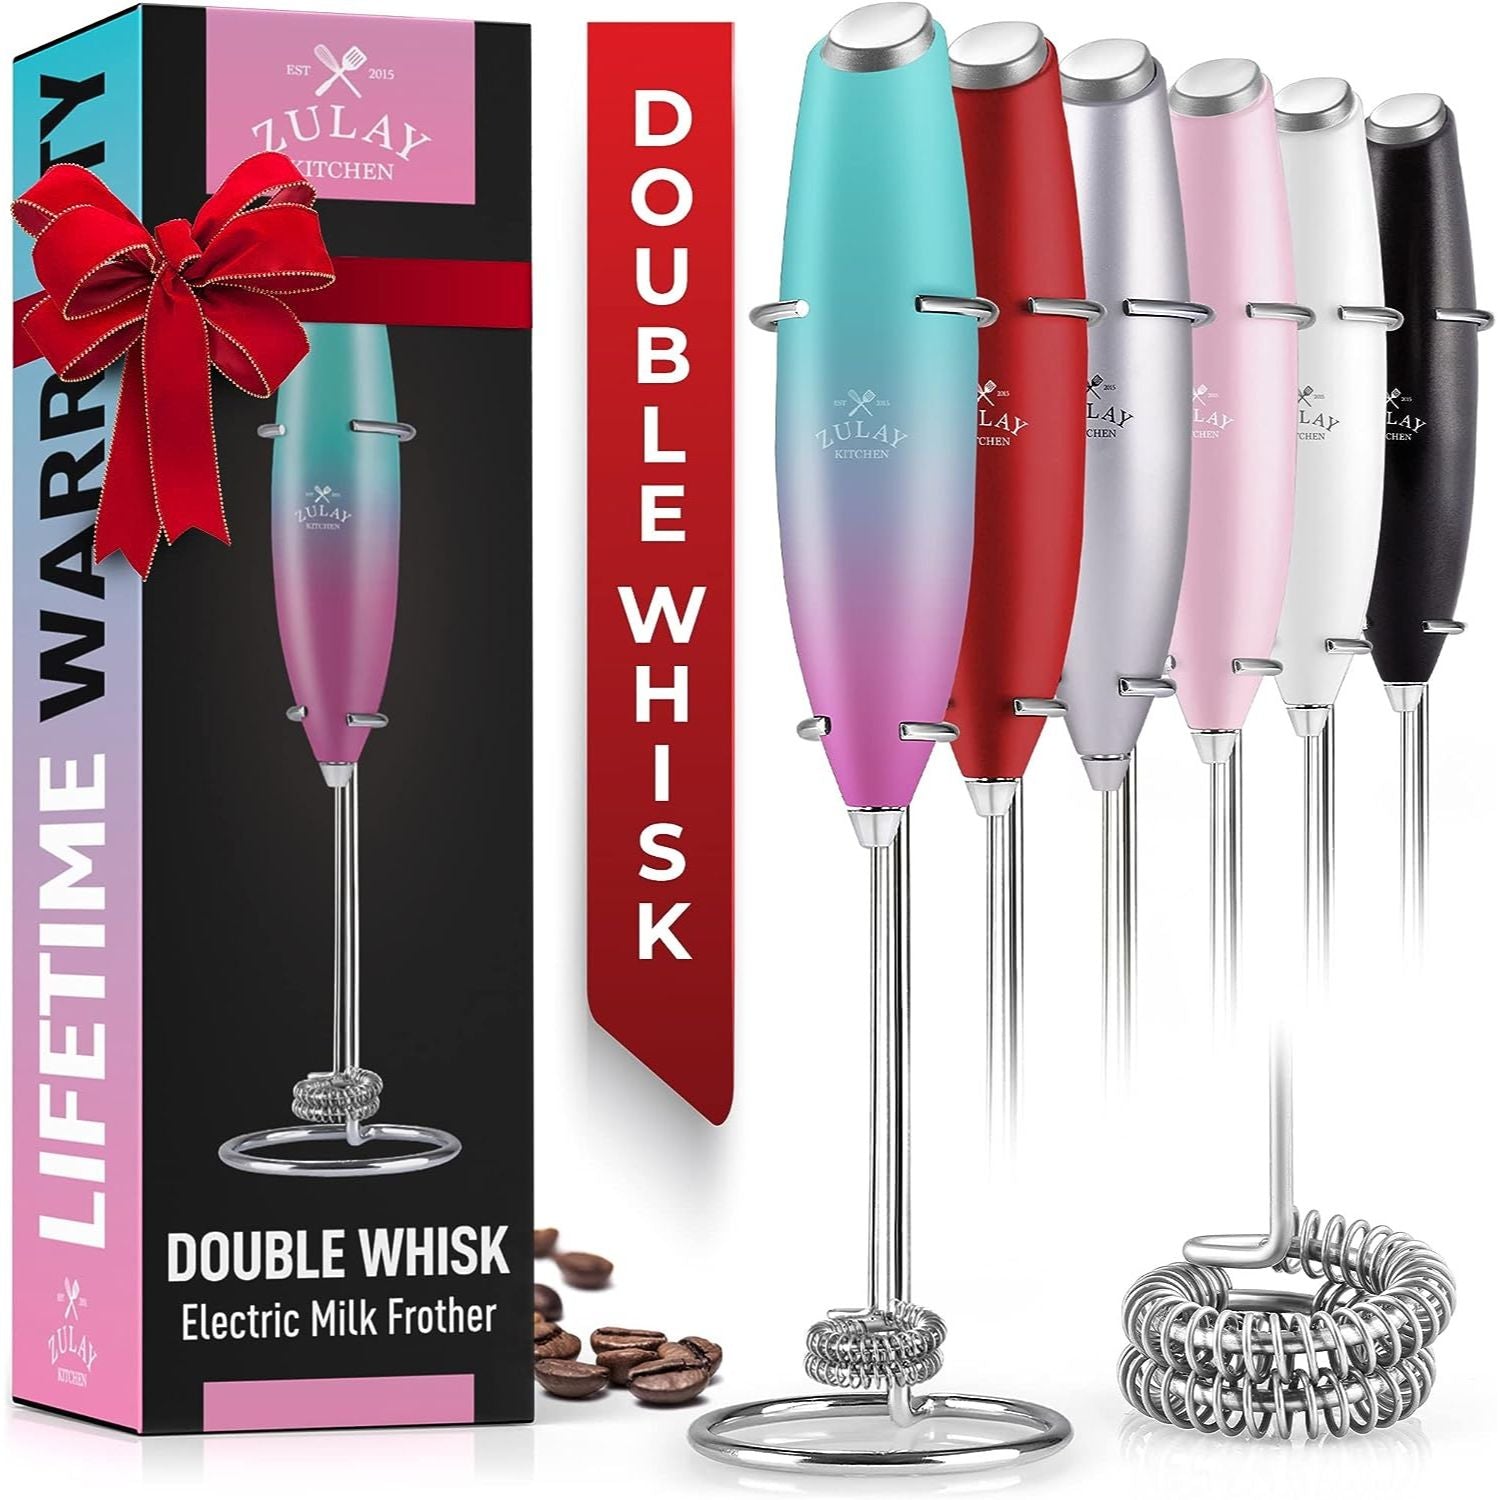 Double Whisk Electric Milk Frother